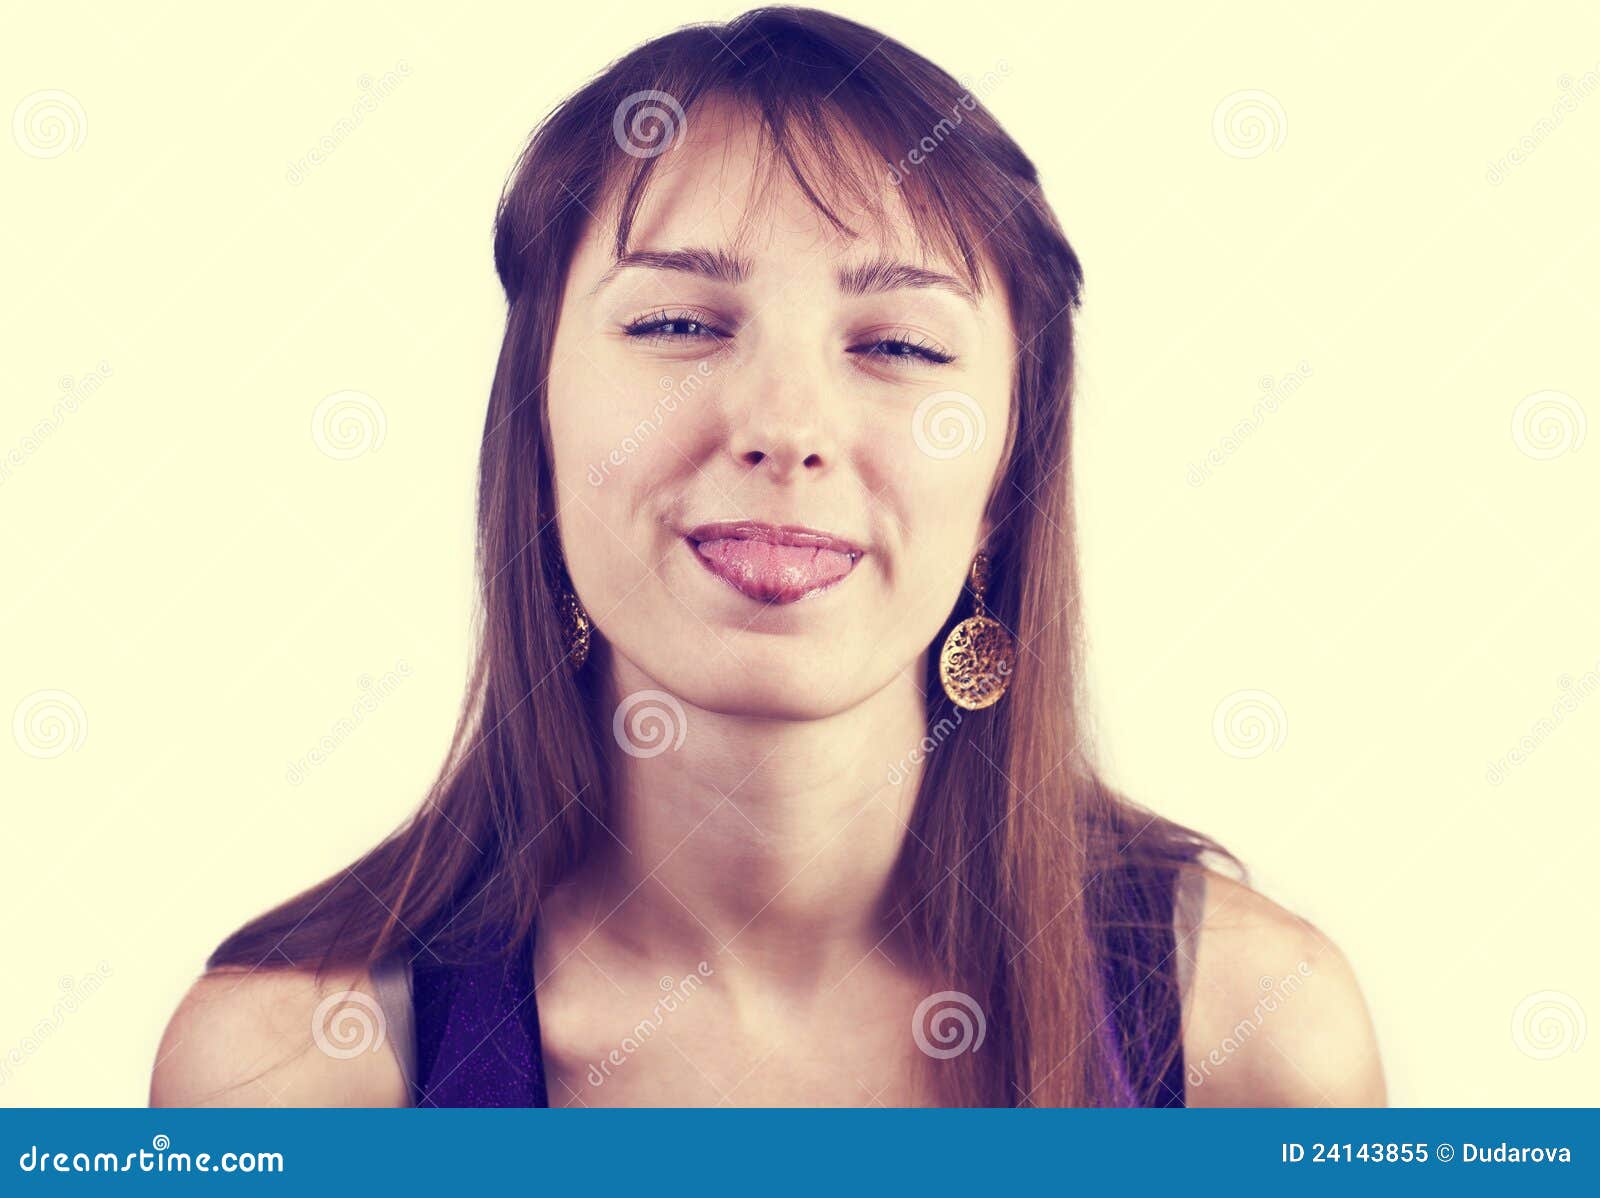 Toned Portrait Of Pretty Woman With Her Tongue Out Stock Image Image Of Attractive Pretty 